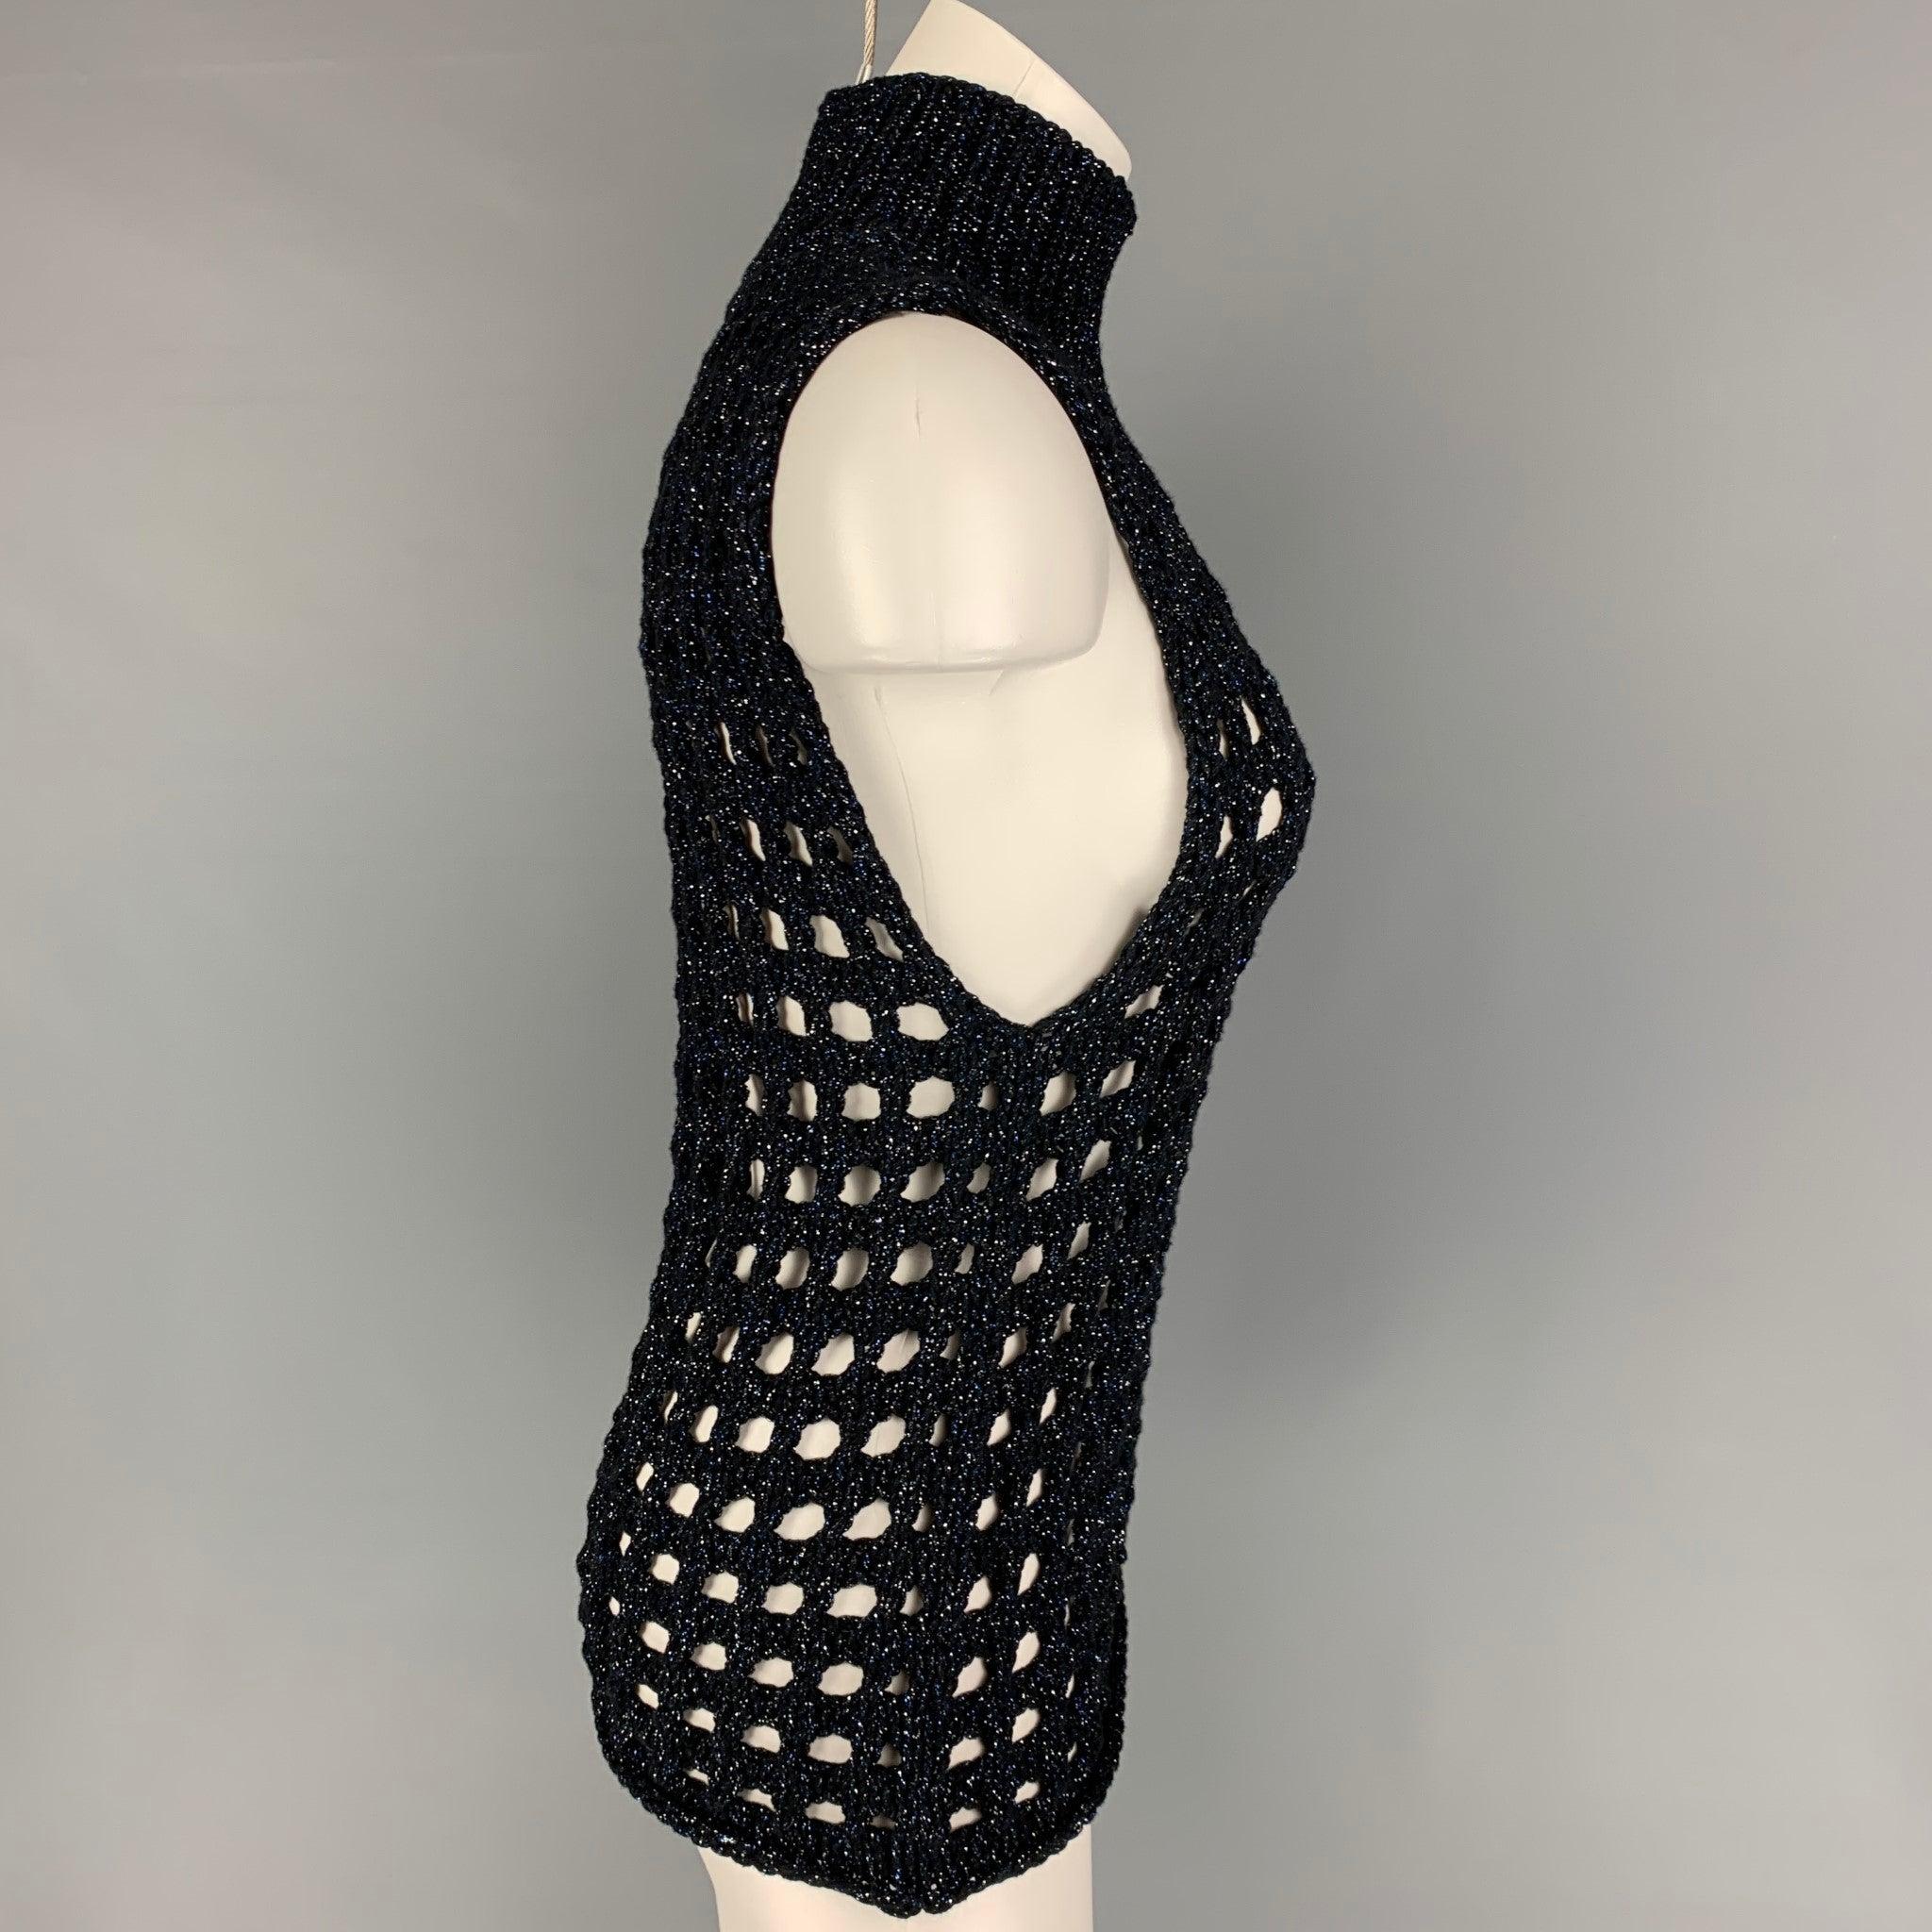 IRO vest comes in a black & blue knitted cotton blend featuring a turtle neck.
Very Good
Pre-Owned Condition. 

Marked:   S 

Measurements: 
 
Shoulder: 14 inches  Bust: 28 inches  Length: 25 inches 
  
  
 
Reference: 118978
Category: Vest